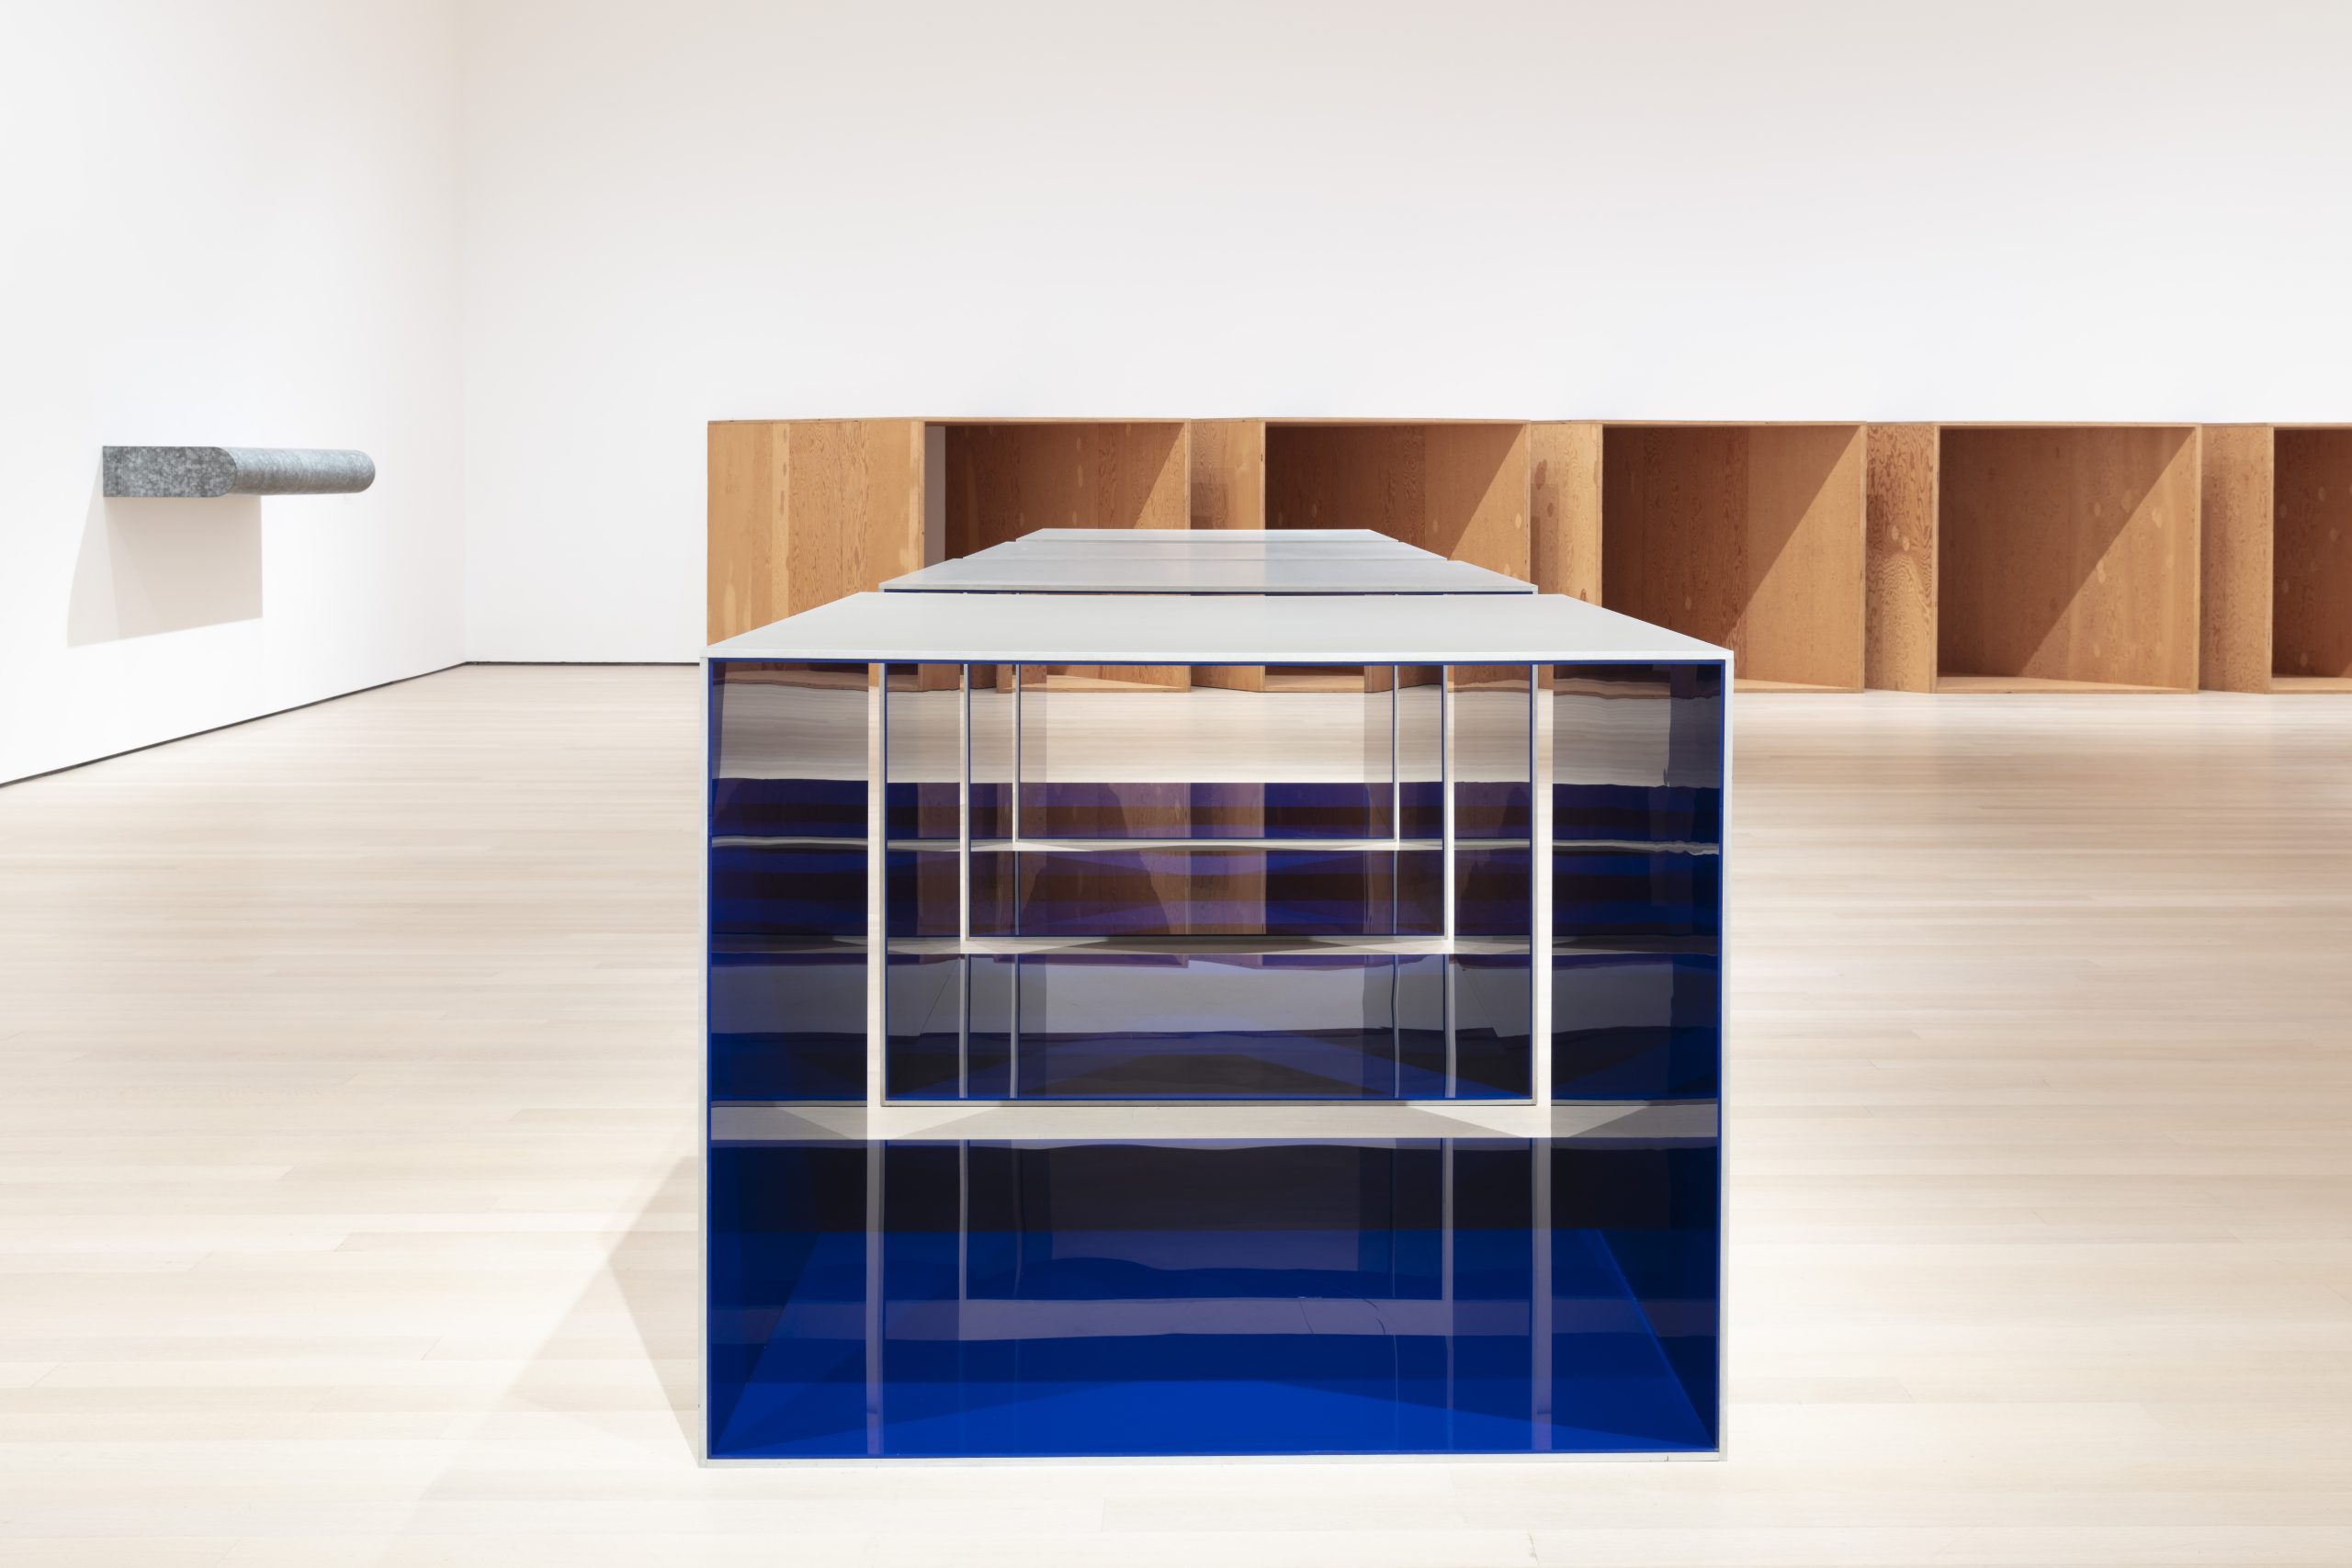 A square metal and plastic sculpture with a blue base in a museum gallery